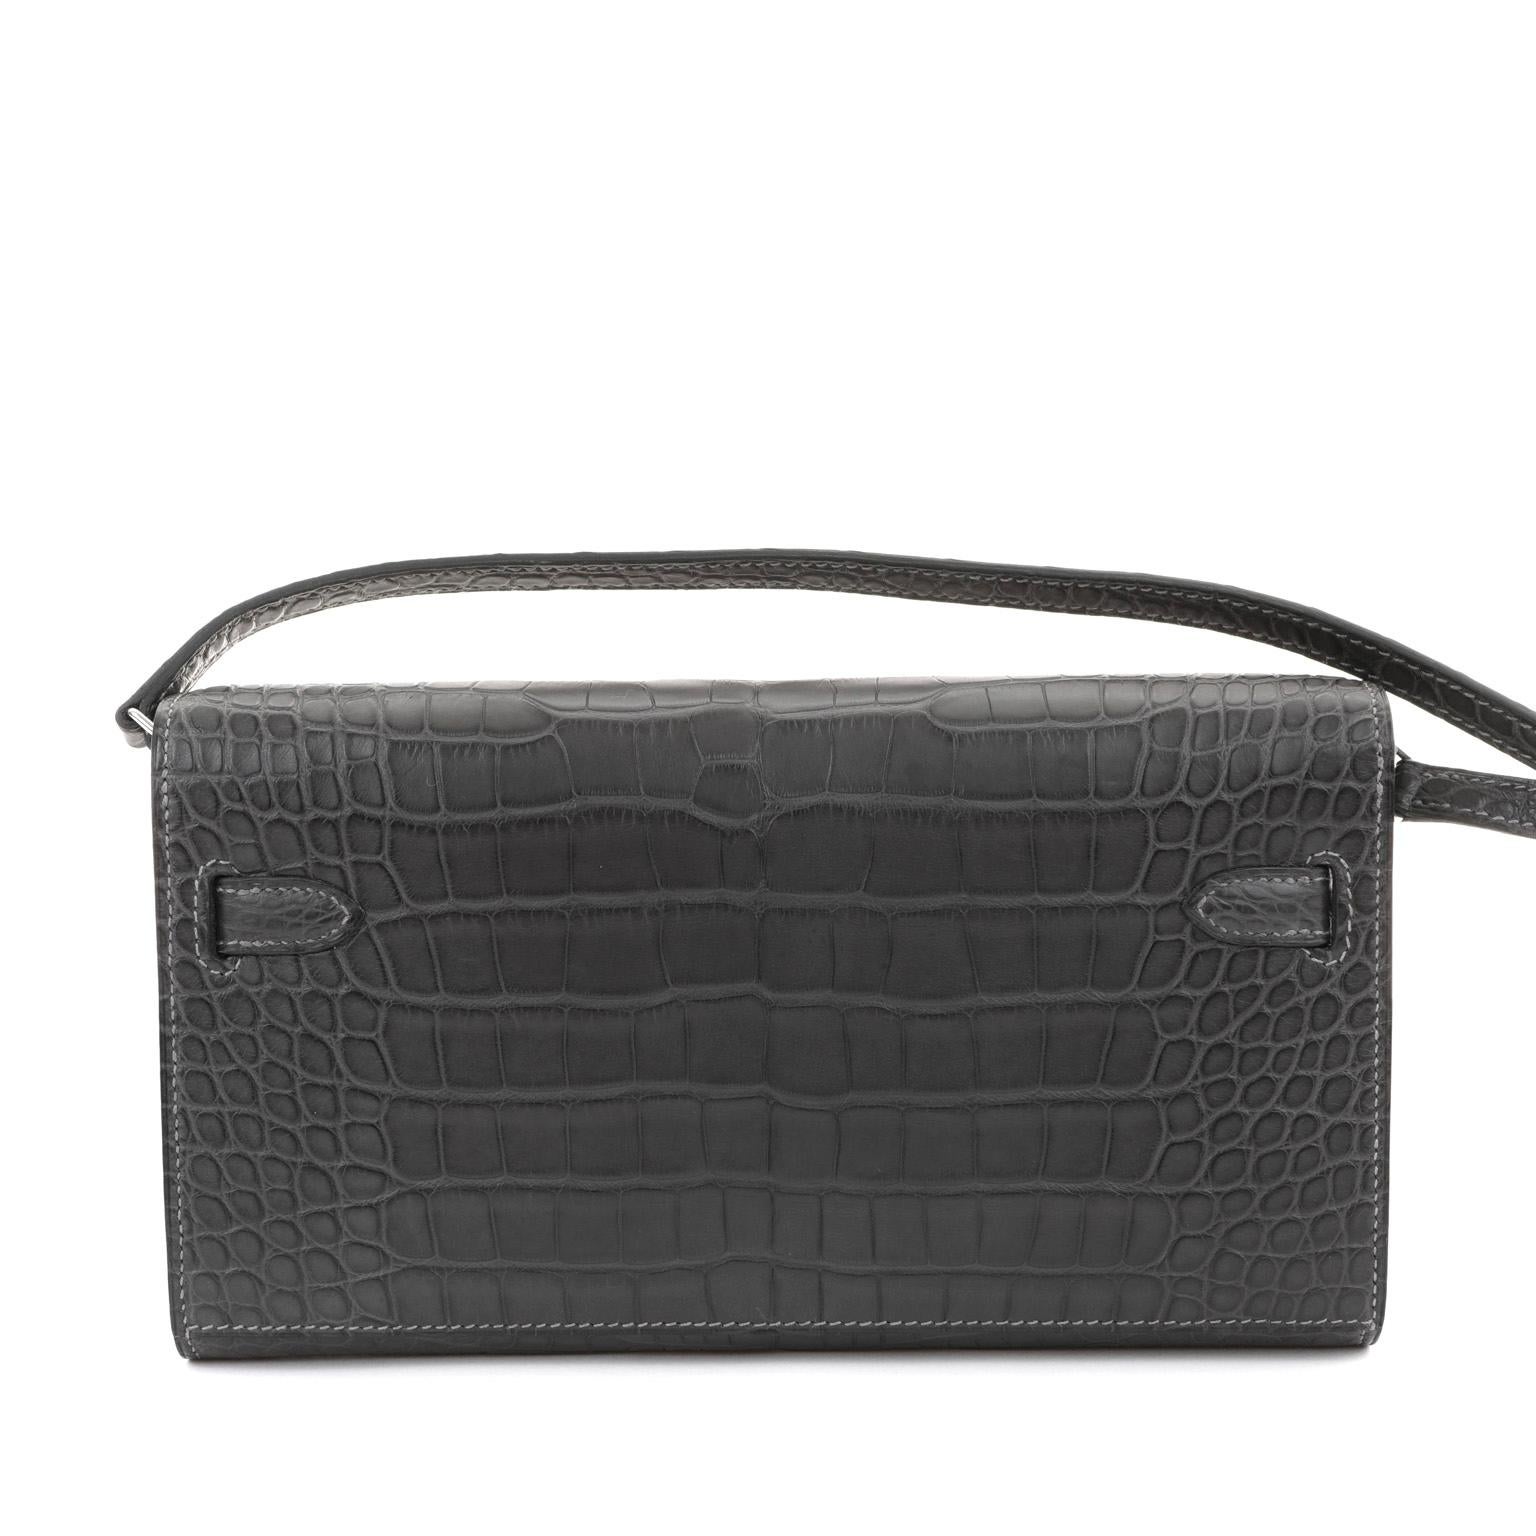 This authentic Hermès Graphite Alligator Kelly To Go Wallet is in pristine unworn condition with the protective plastic intact on the palladium hardware.  Sleek, stylish and versatile, the To Go Wallet functions a cross body bag as well as a holder